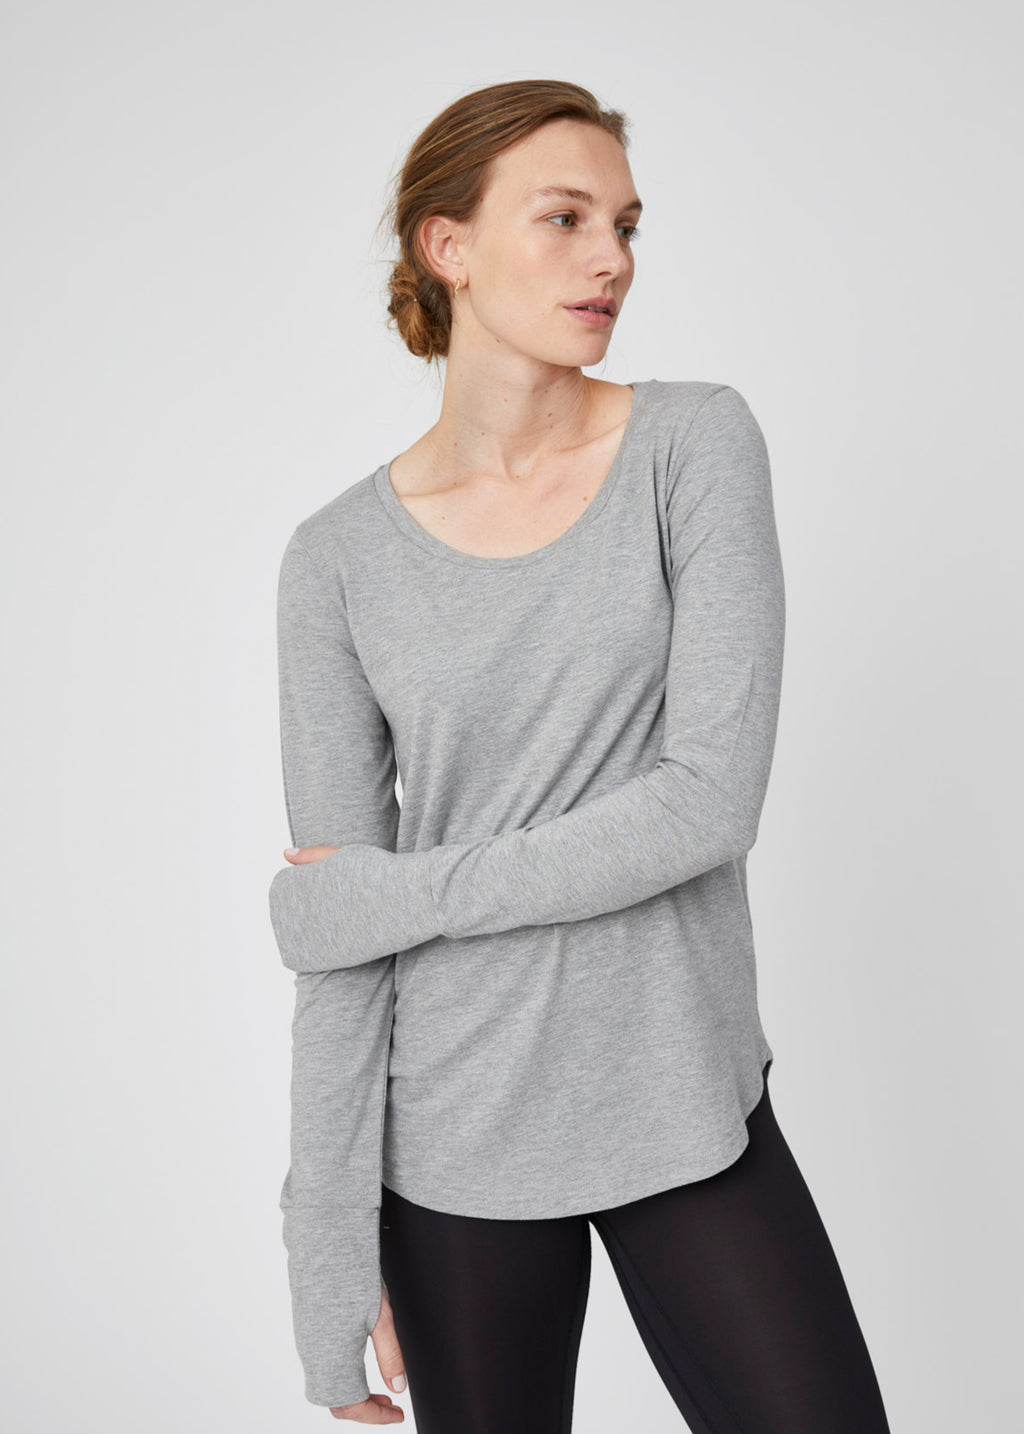 Colette Long Sleeve Tee | Sustainable | Theo and George – Theo + George